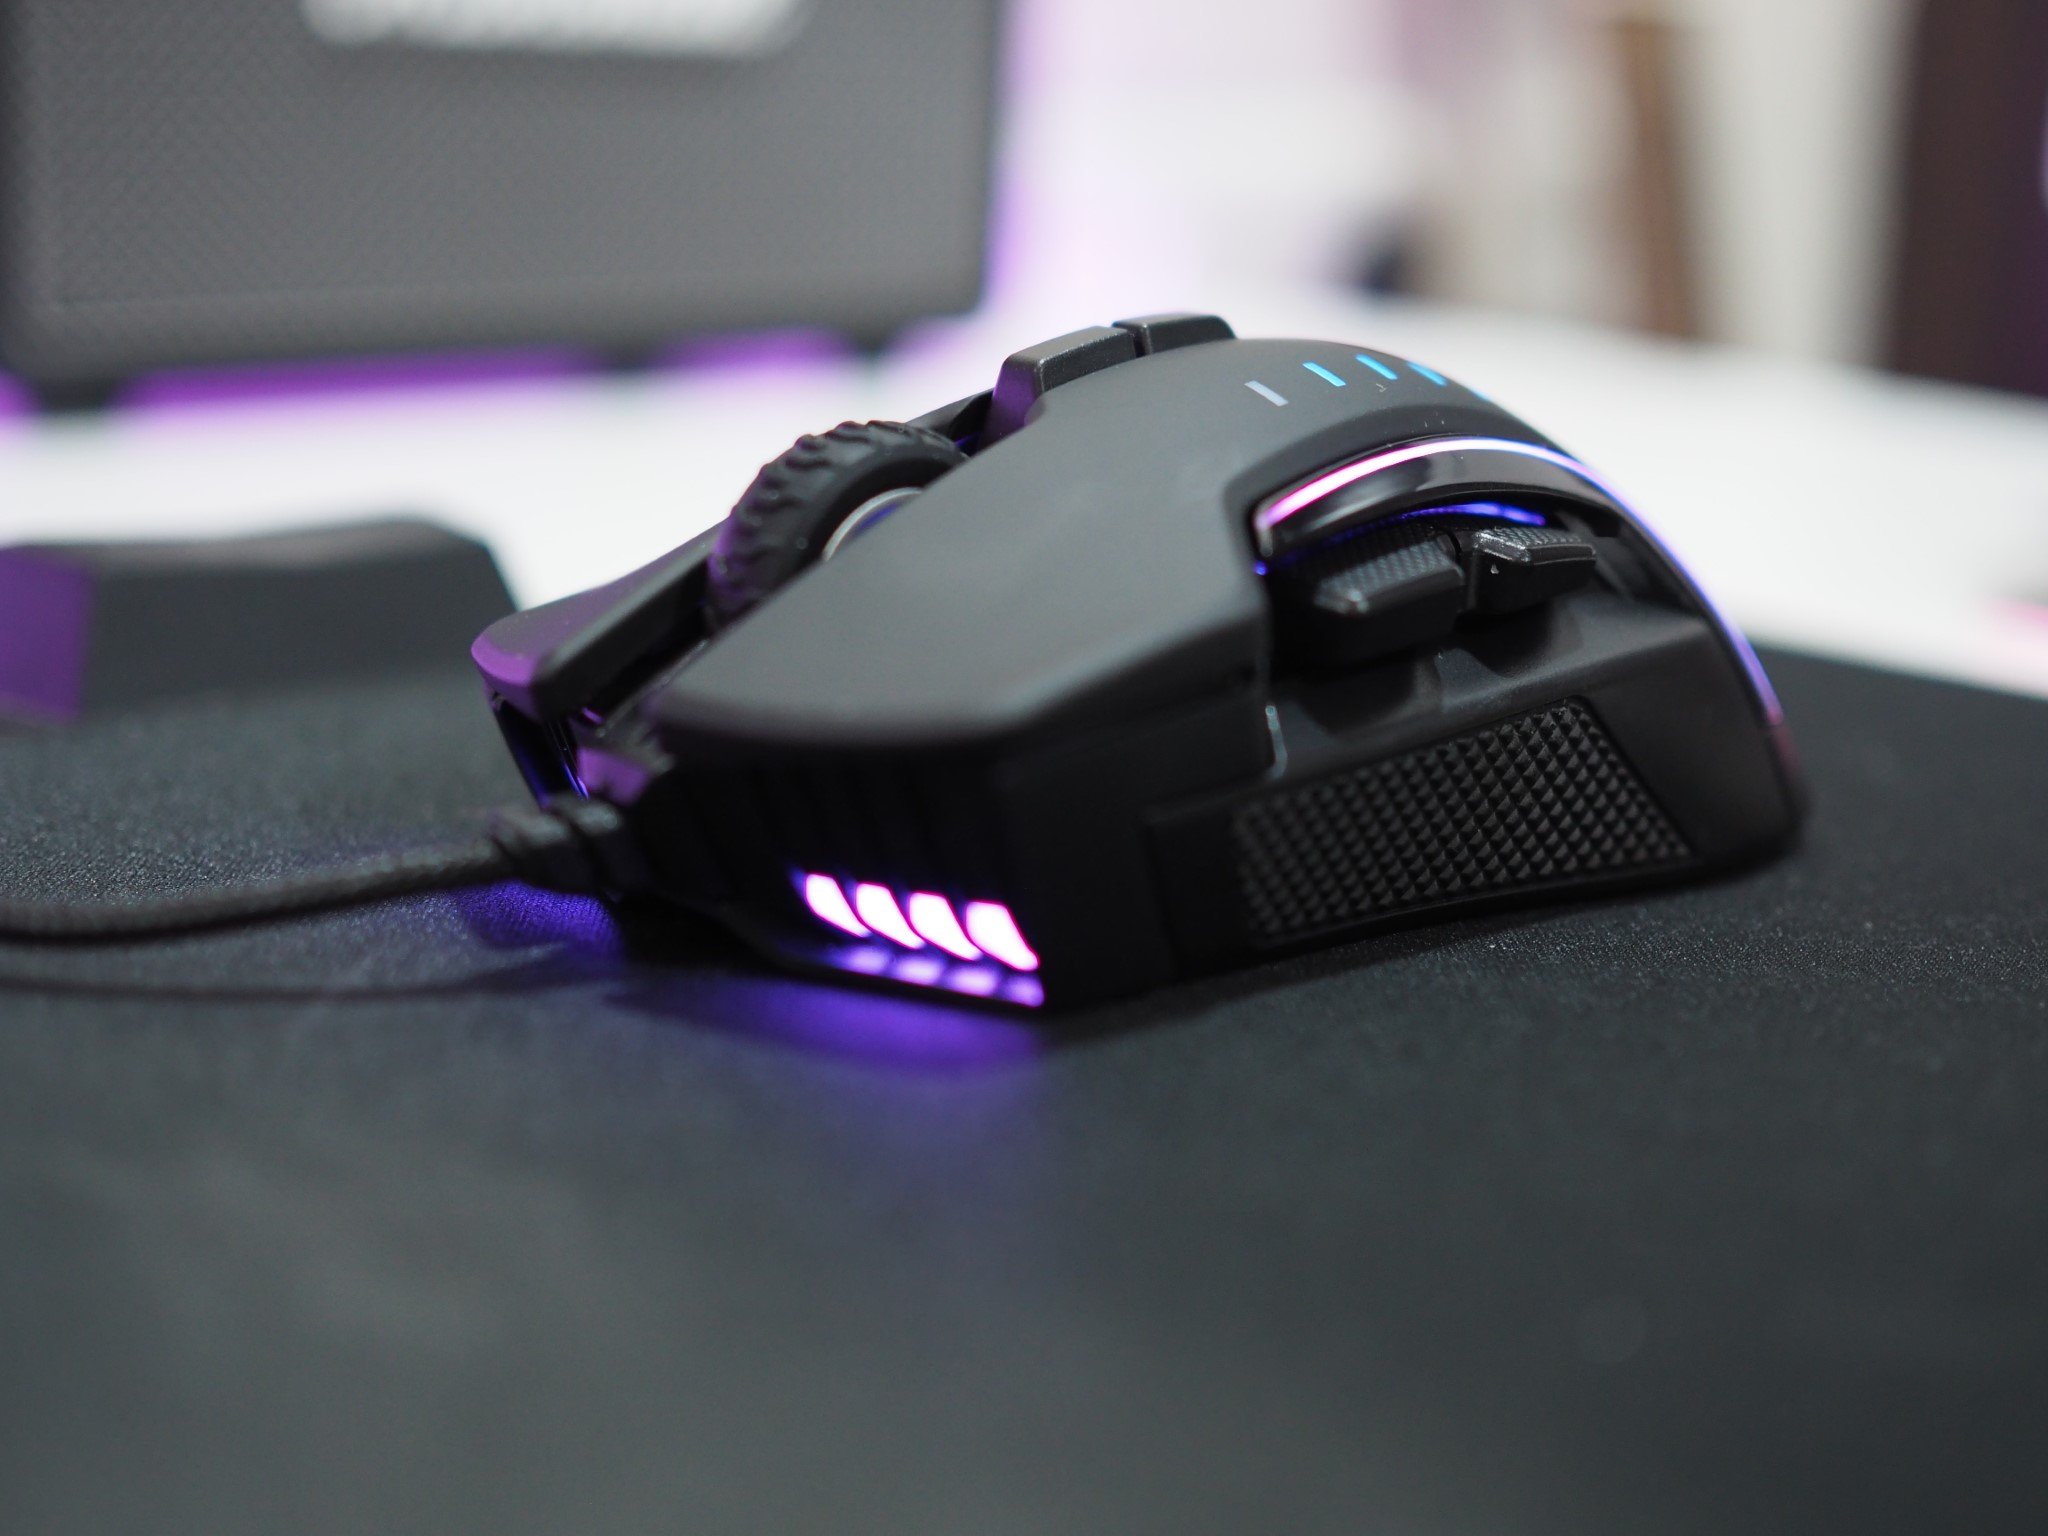 Glaive RGB Pro review: An already-great gaming mouse gets even better | Windows Central